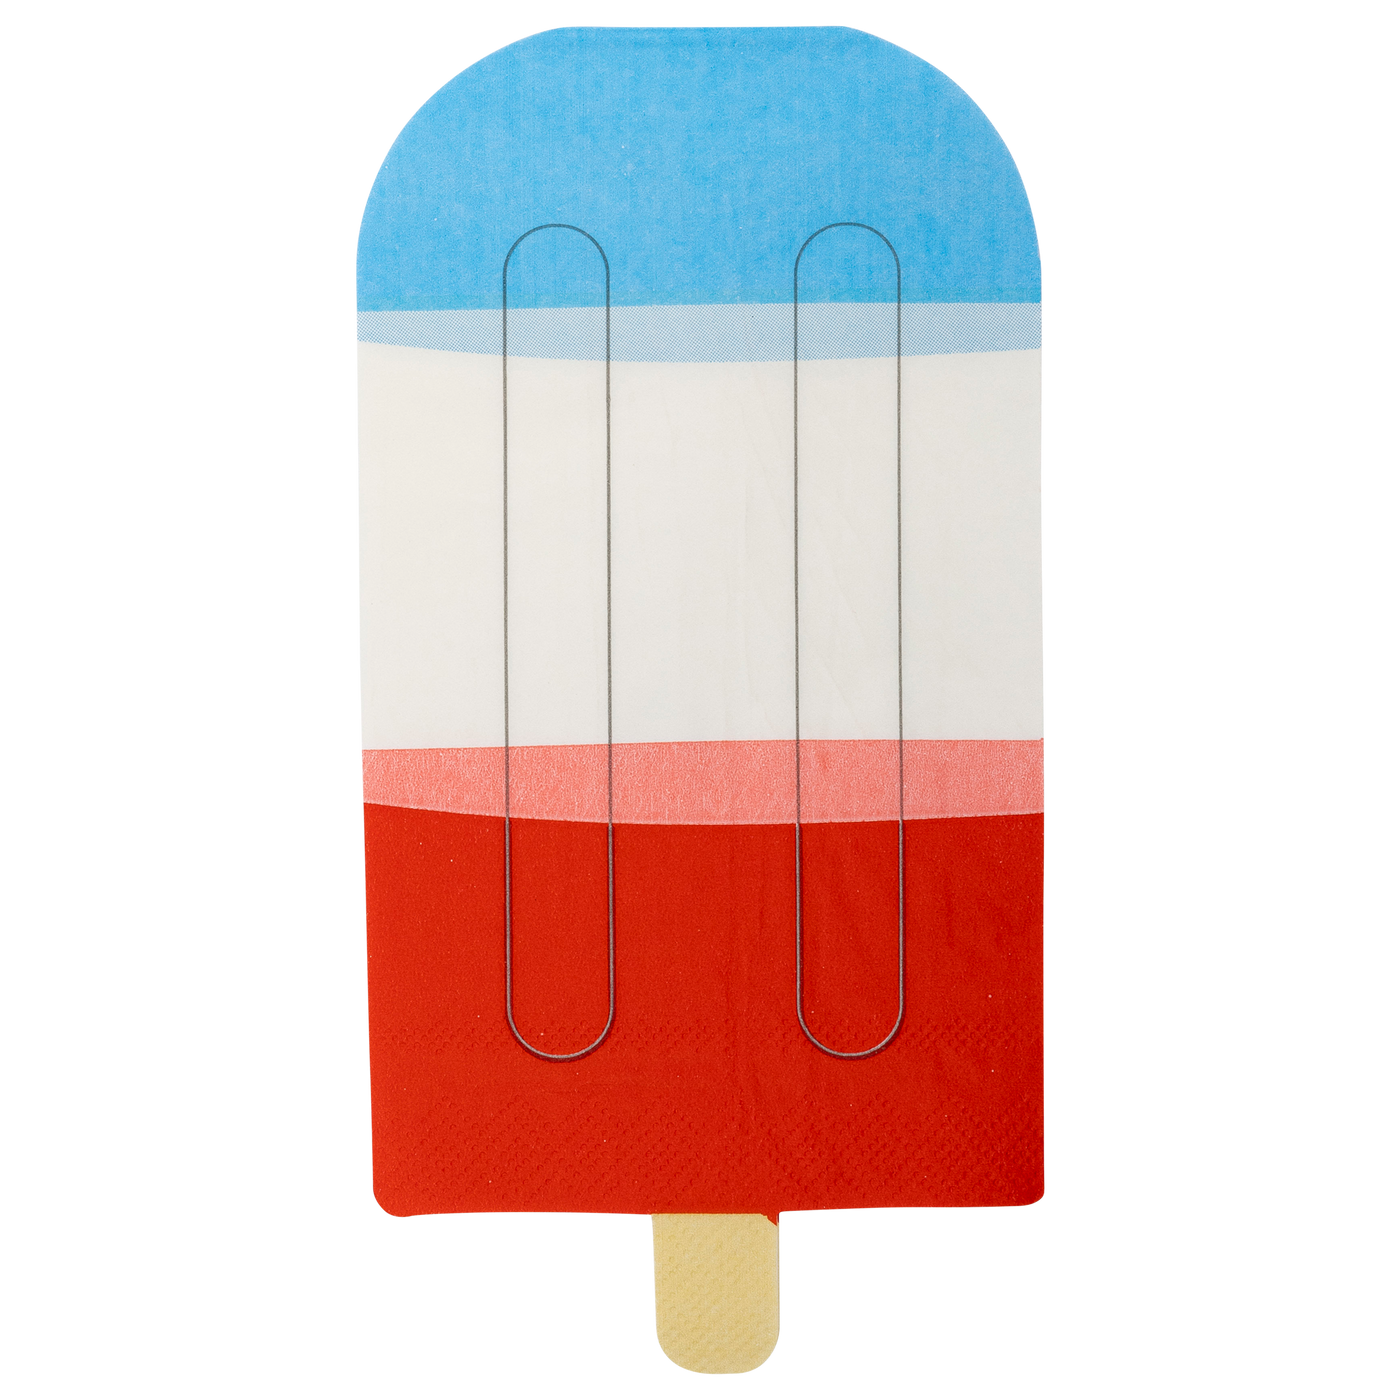 PLNP339 - Red White Blue Ice Pop Shaped Paper Guest Napkin